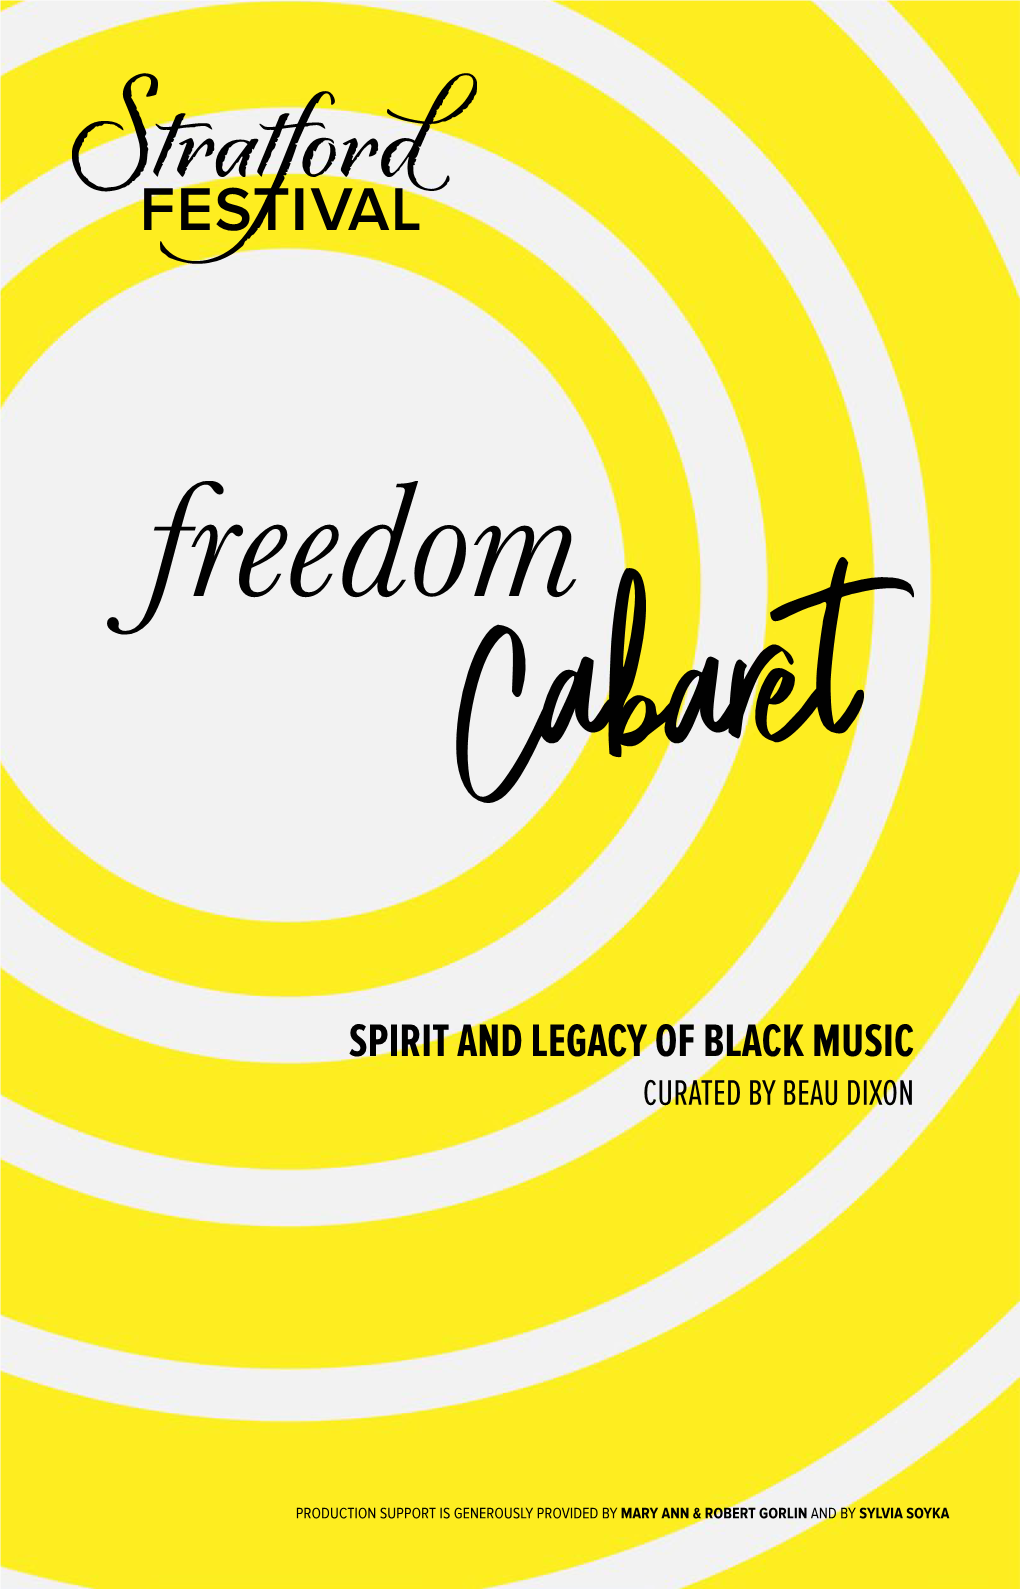 Spirit and Legacy of Black Music Curated by Beau Dixon